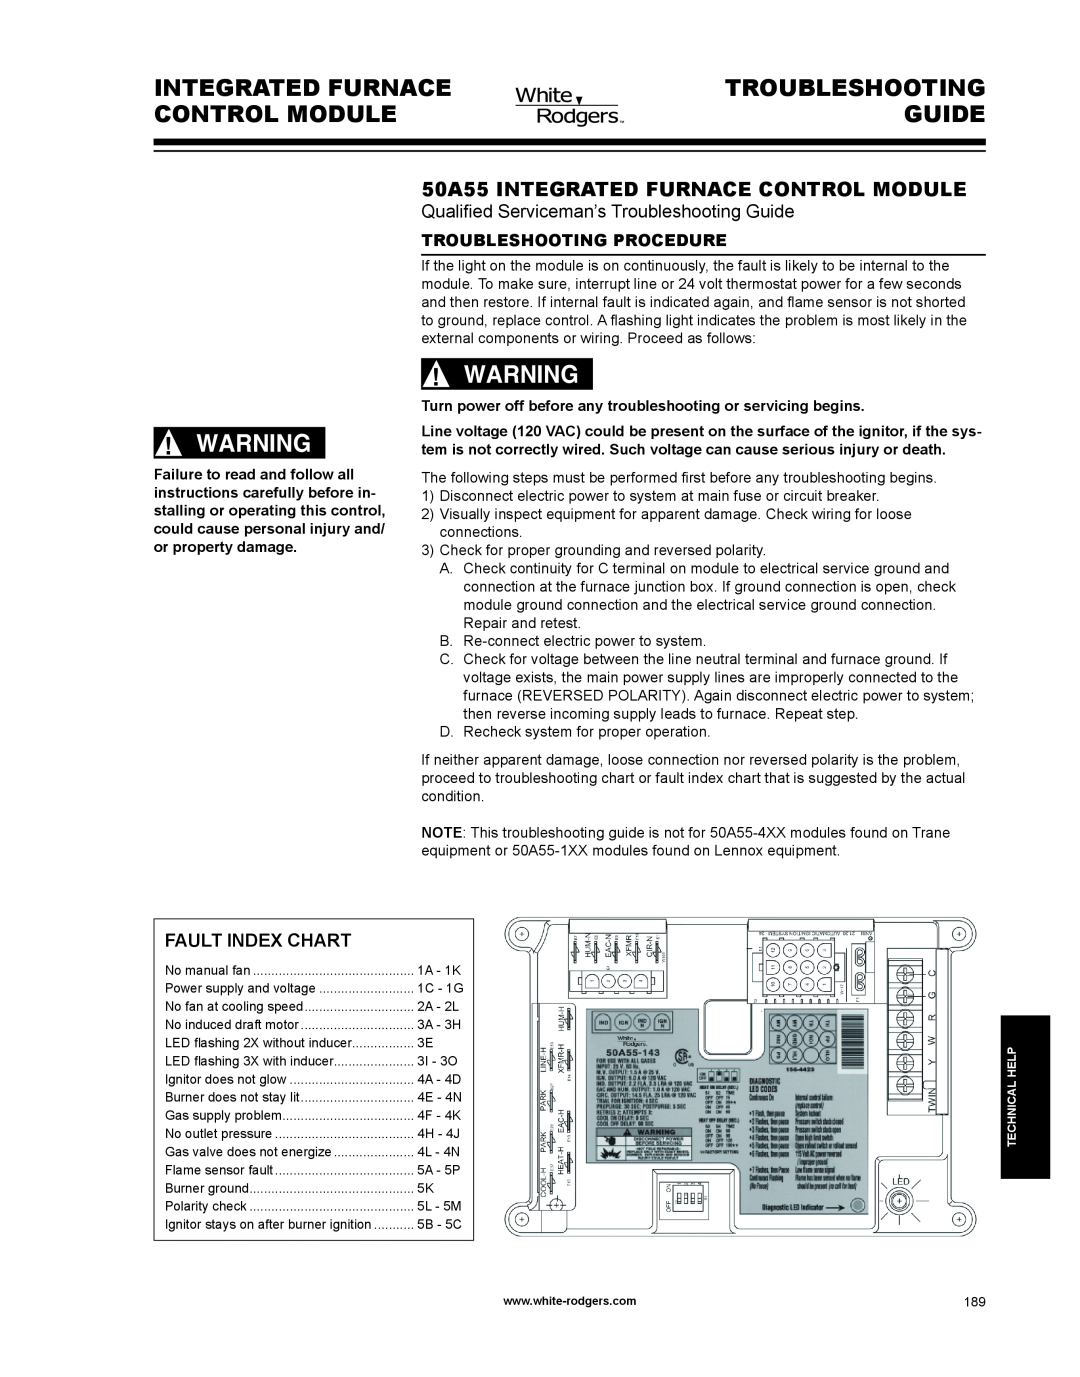 Emerson 50A55 manual Integrated Furnace, Control Module, Guide, Troubleshooting Procedure, Fault Index Chart 